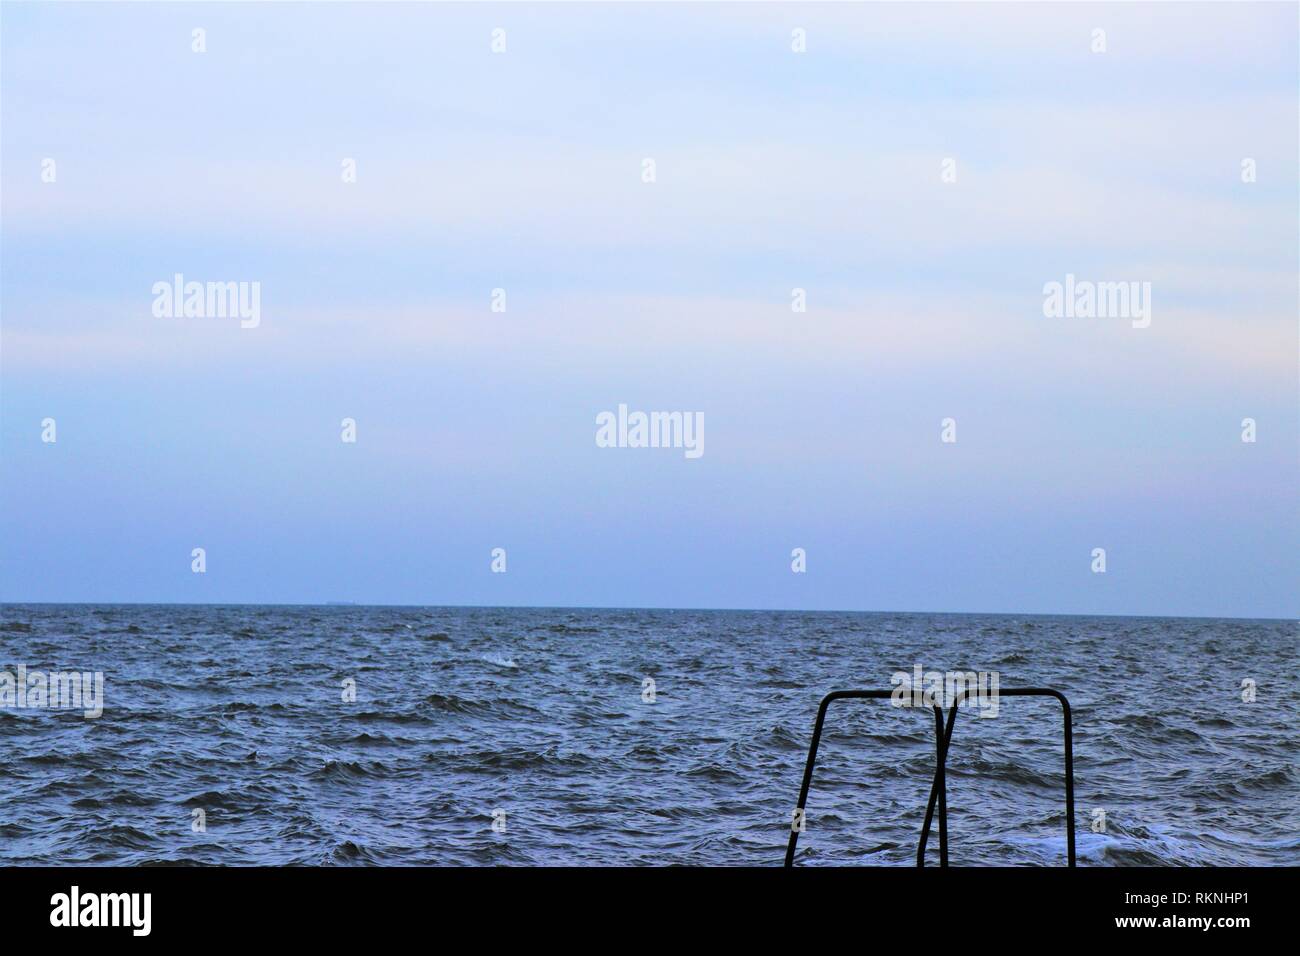 Horizon in the black sea. In the foreground a stepladder. Stock Photo